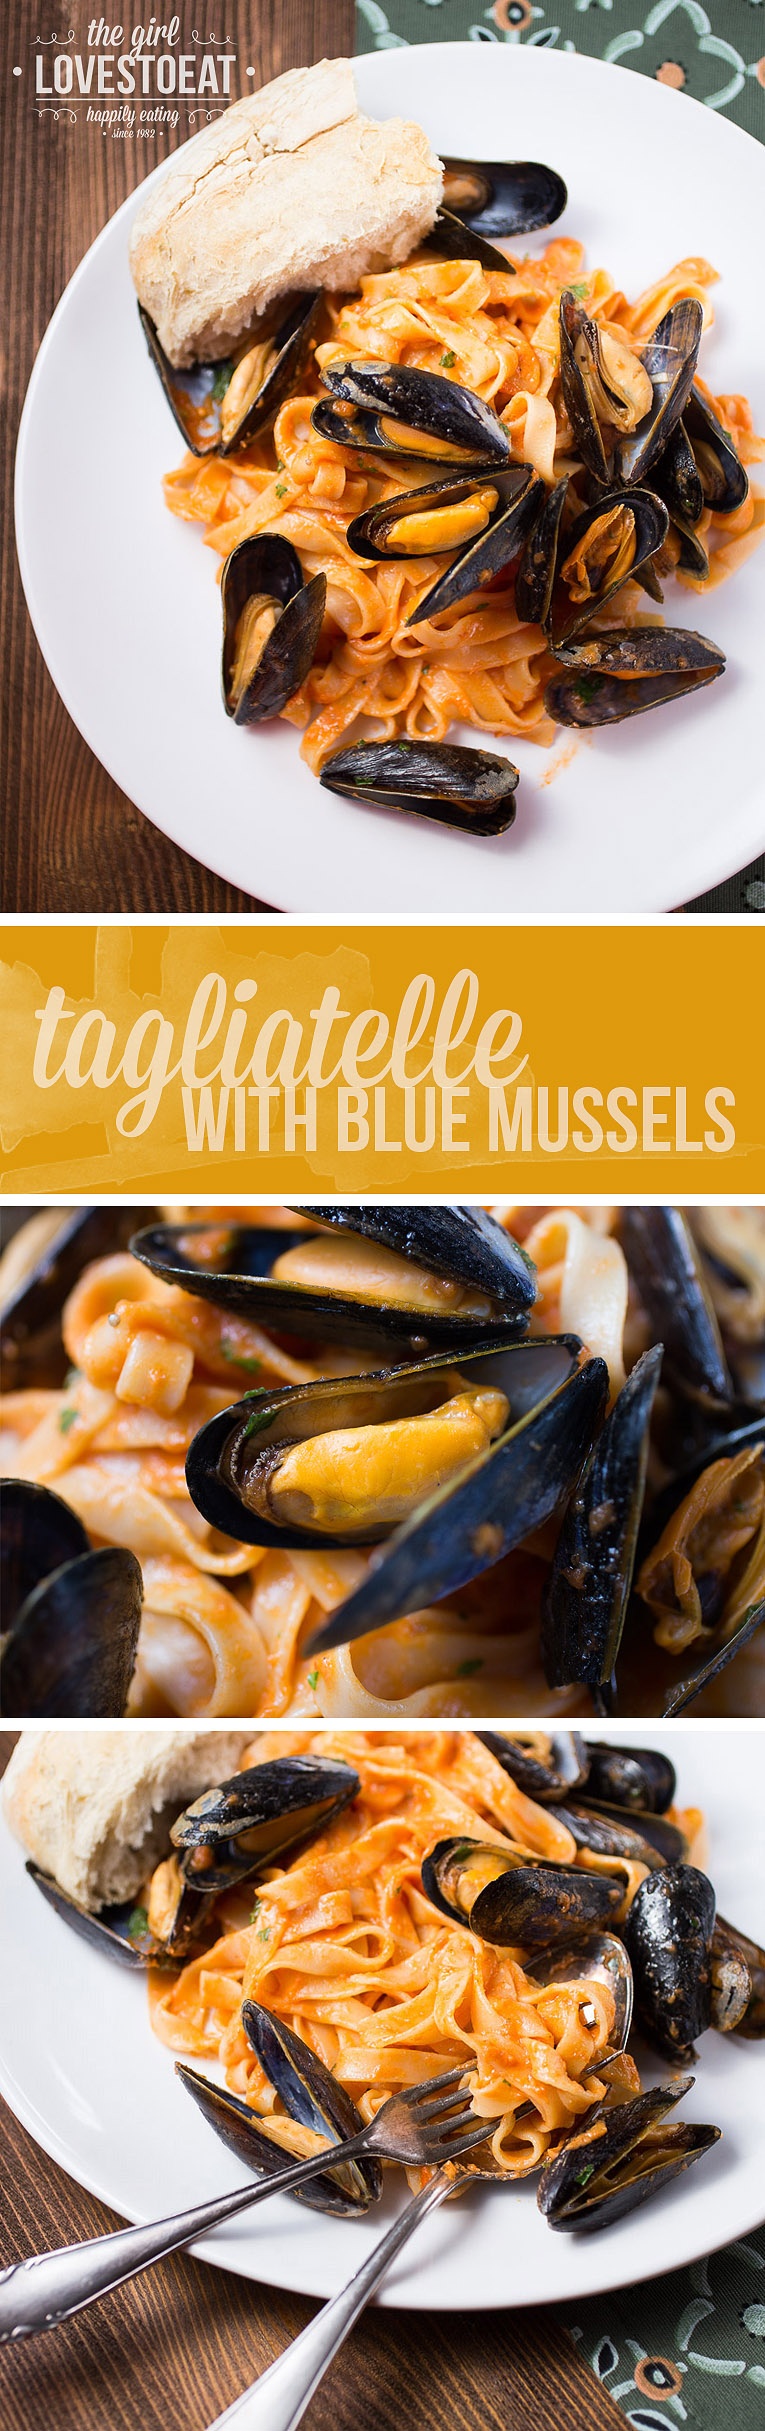 Tagliatelle with blue mussels {The Girl Loves To Eat}